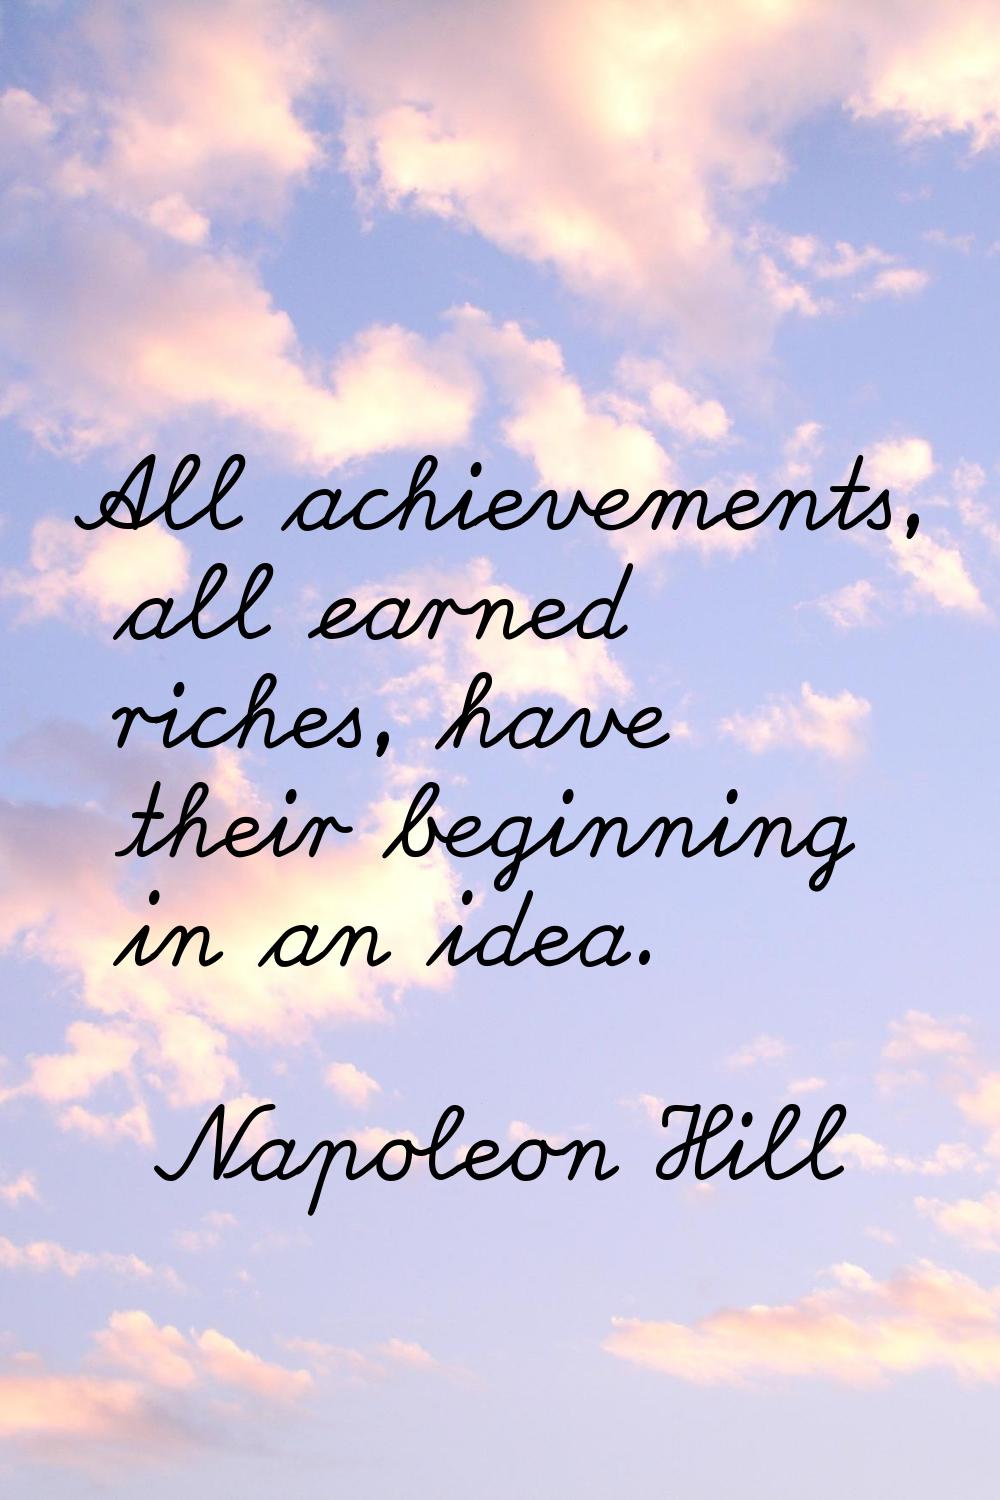 All achievements, all earned riches, have their beginning in an idea.